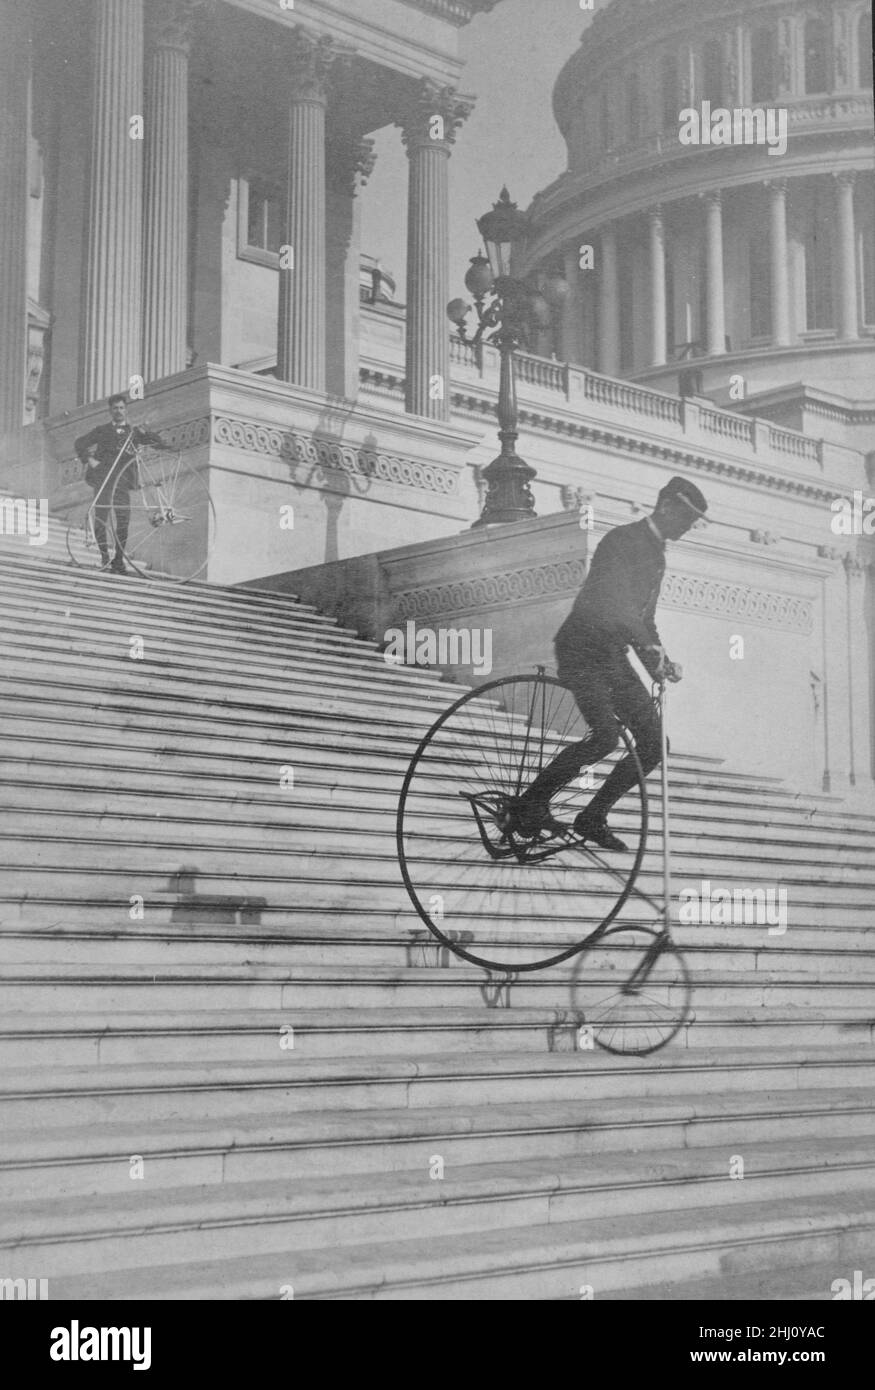 A Perilous Ride - a man rides a bicycle down the steps of the U.S. Capitol as another man with a bicycle waits at the top - Platt Brothers. Stock Photo